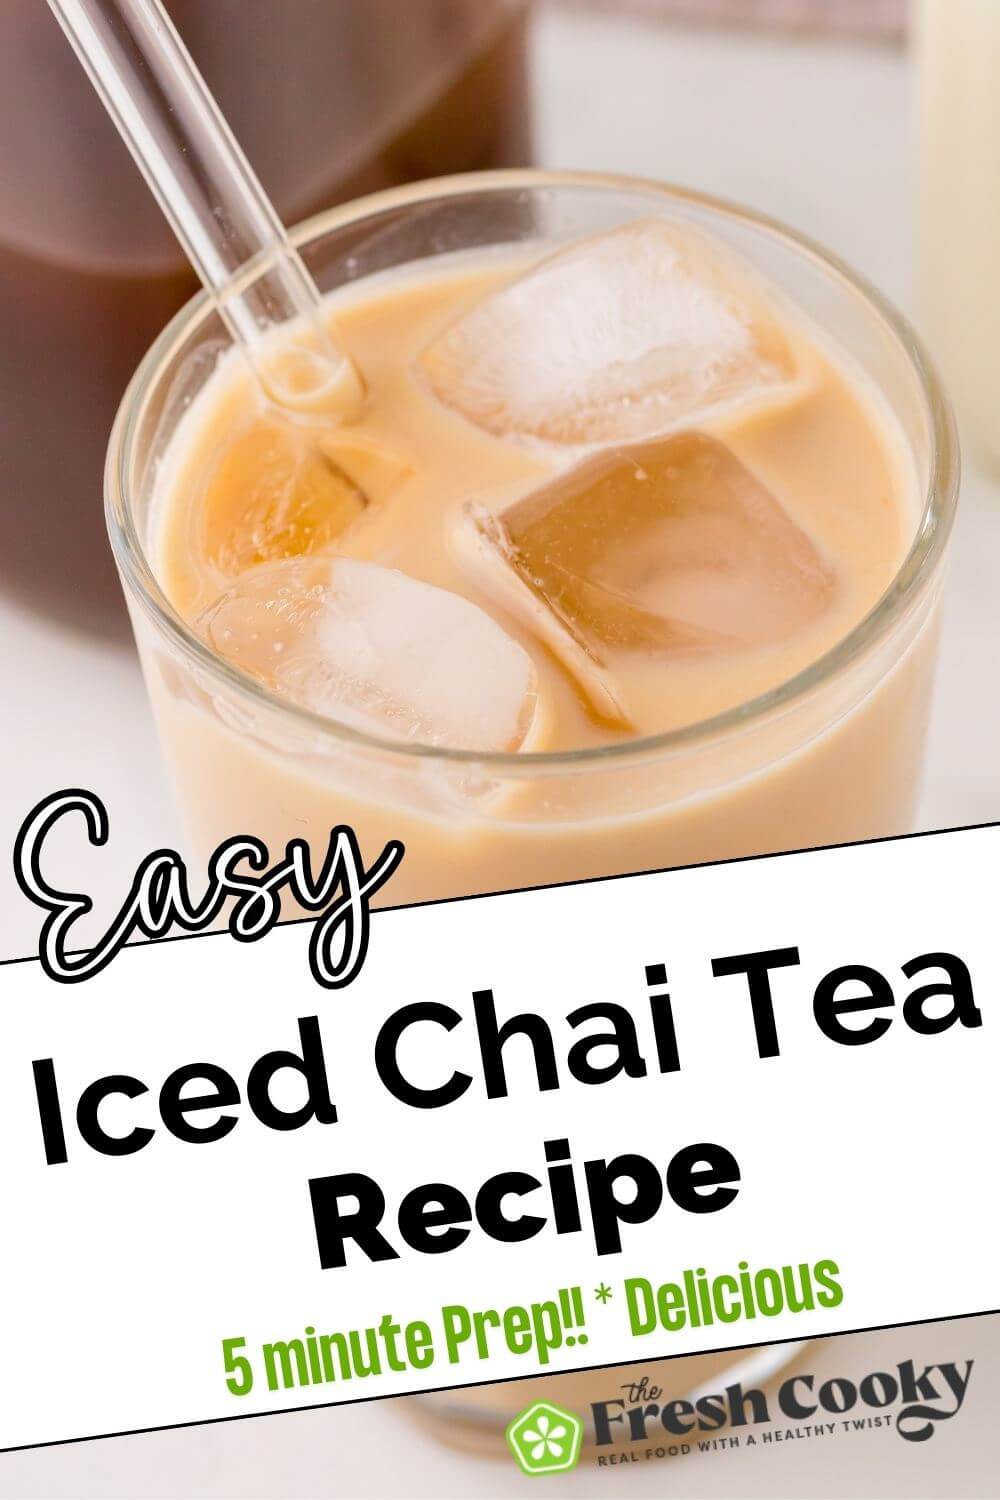 A full glass of chai tea latte with ice shows the straw pointing to the top left, to pin.